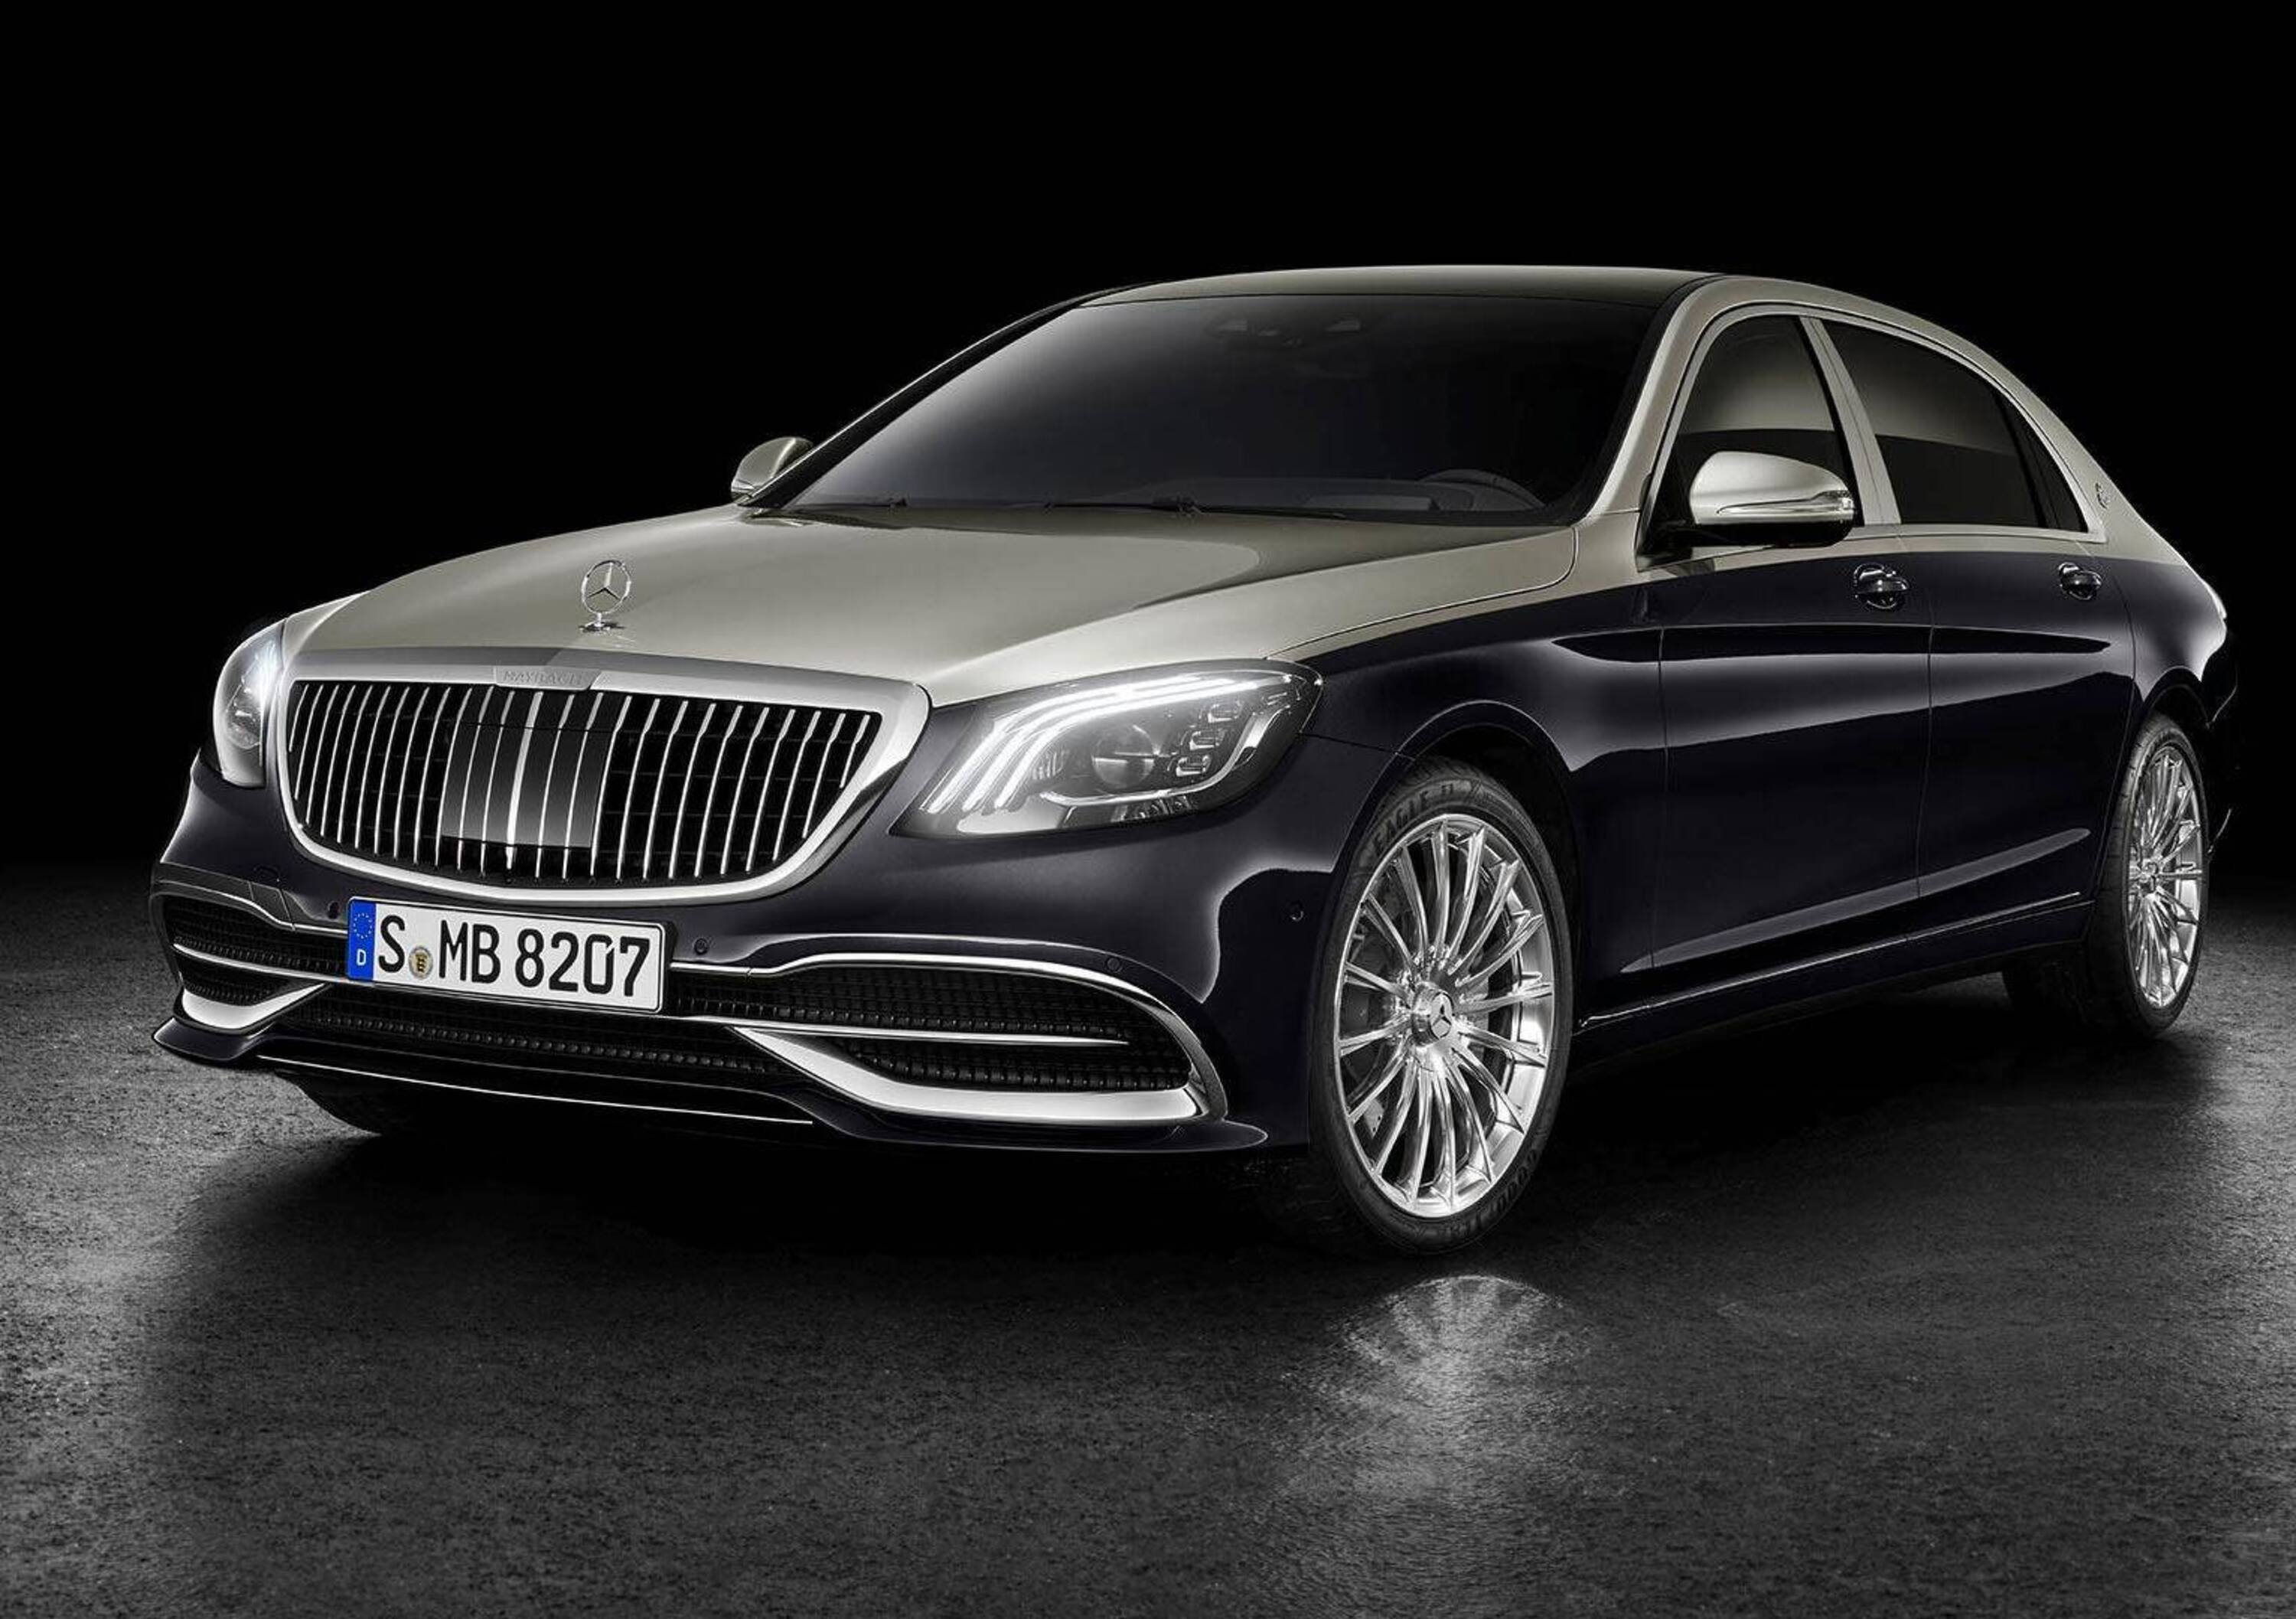 Mercedes-Maybach Classe S restyling, debutto a Ginevra 